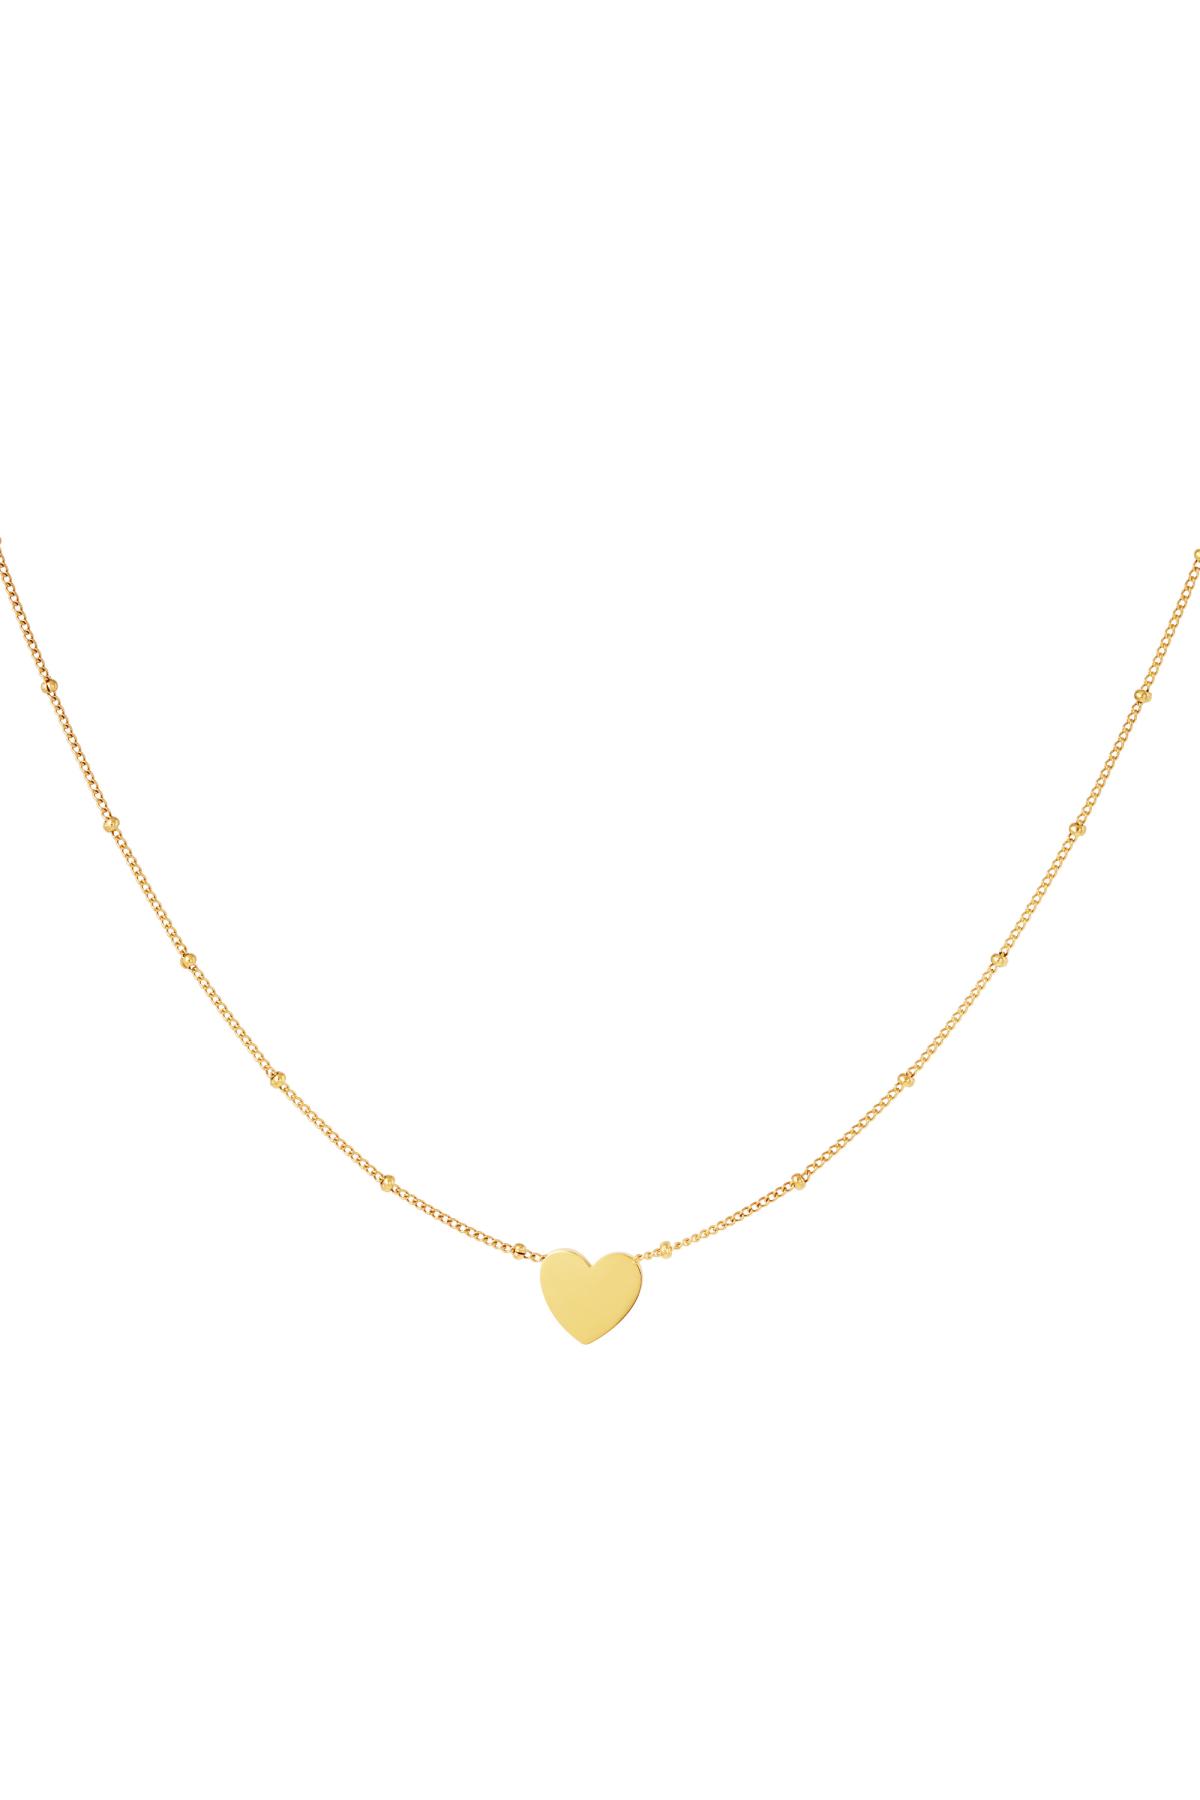 Minimalistic necklace heart Gold Stainless Steel